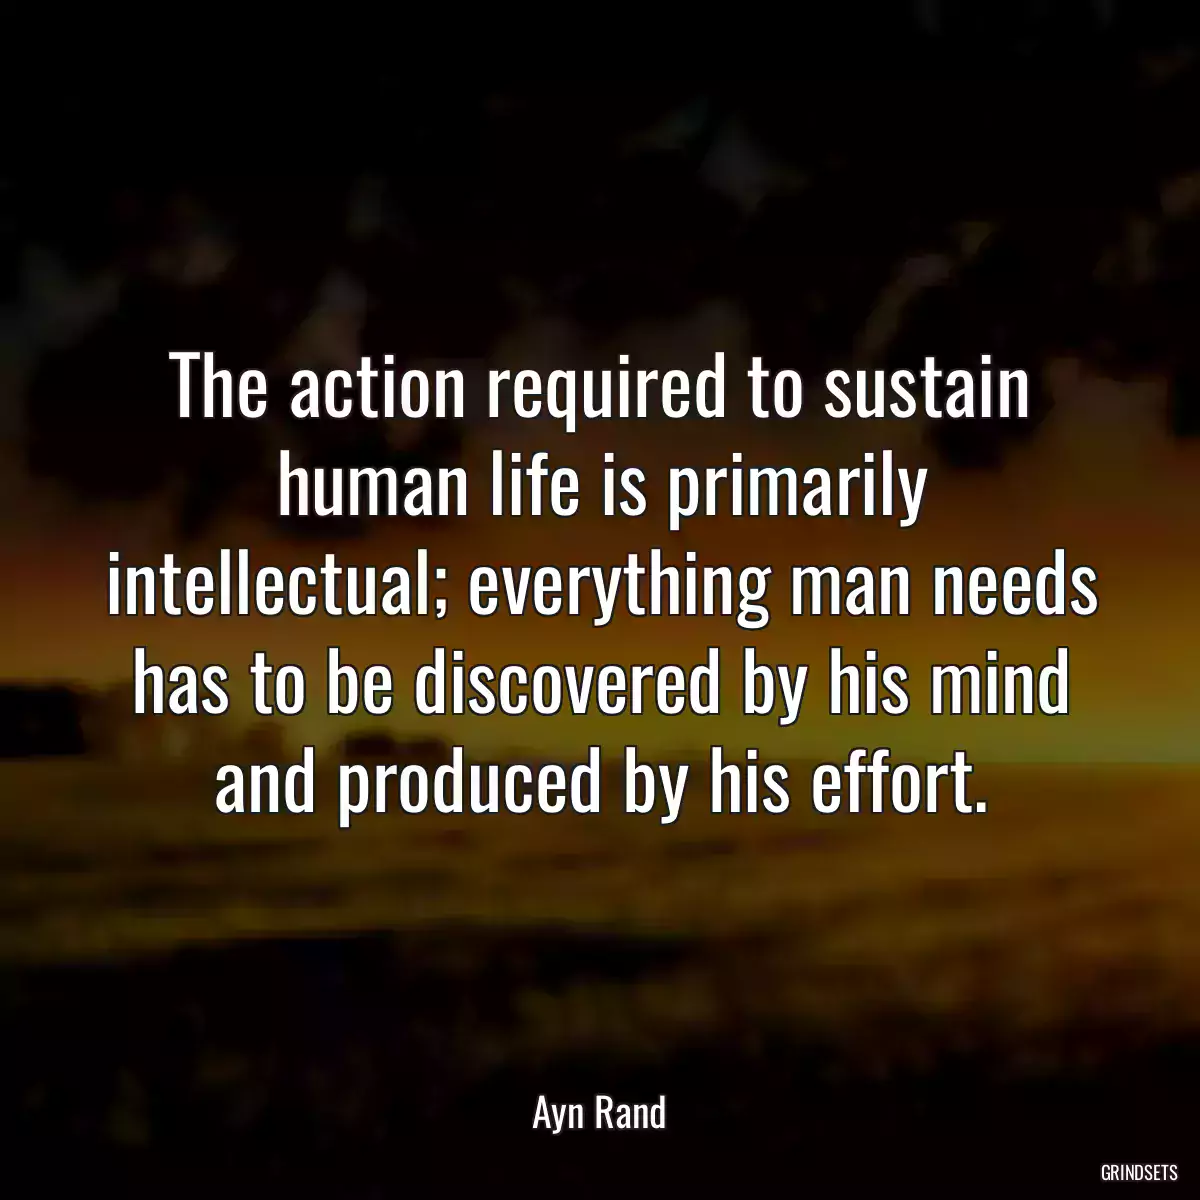 The action required to sustain human life is primarily intellectual; everything man needs has to be discovered by his mind and produced by his effort.